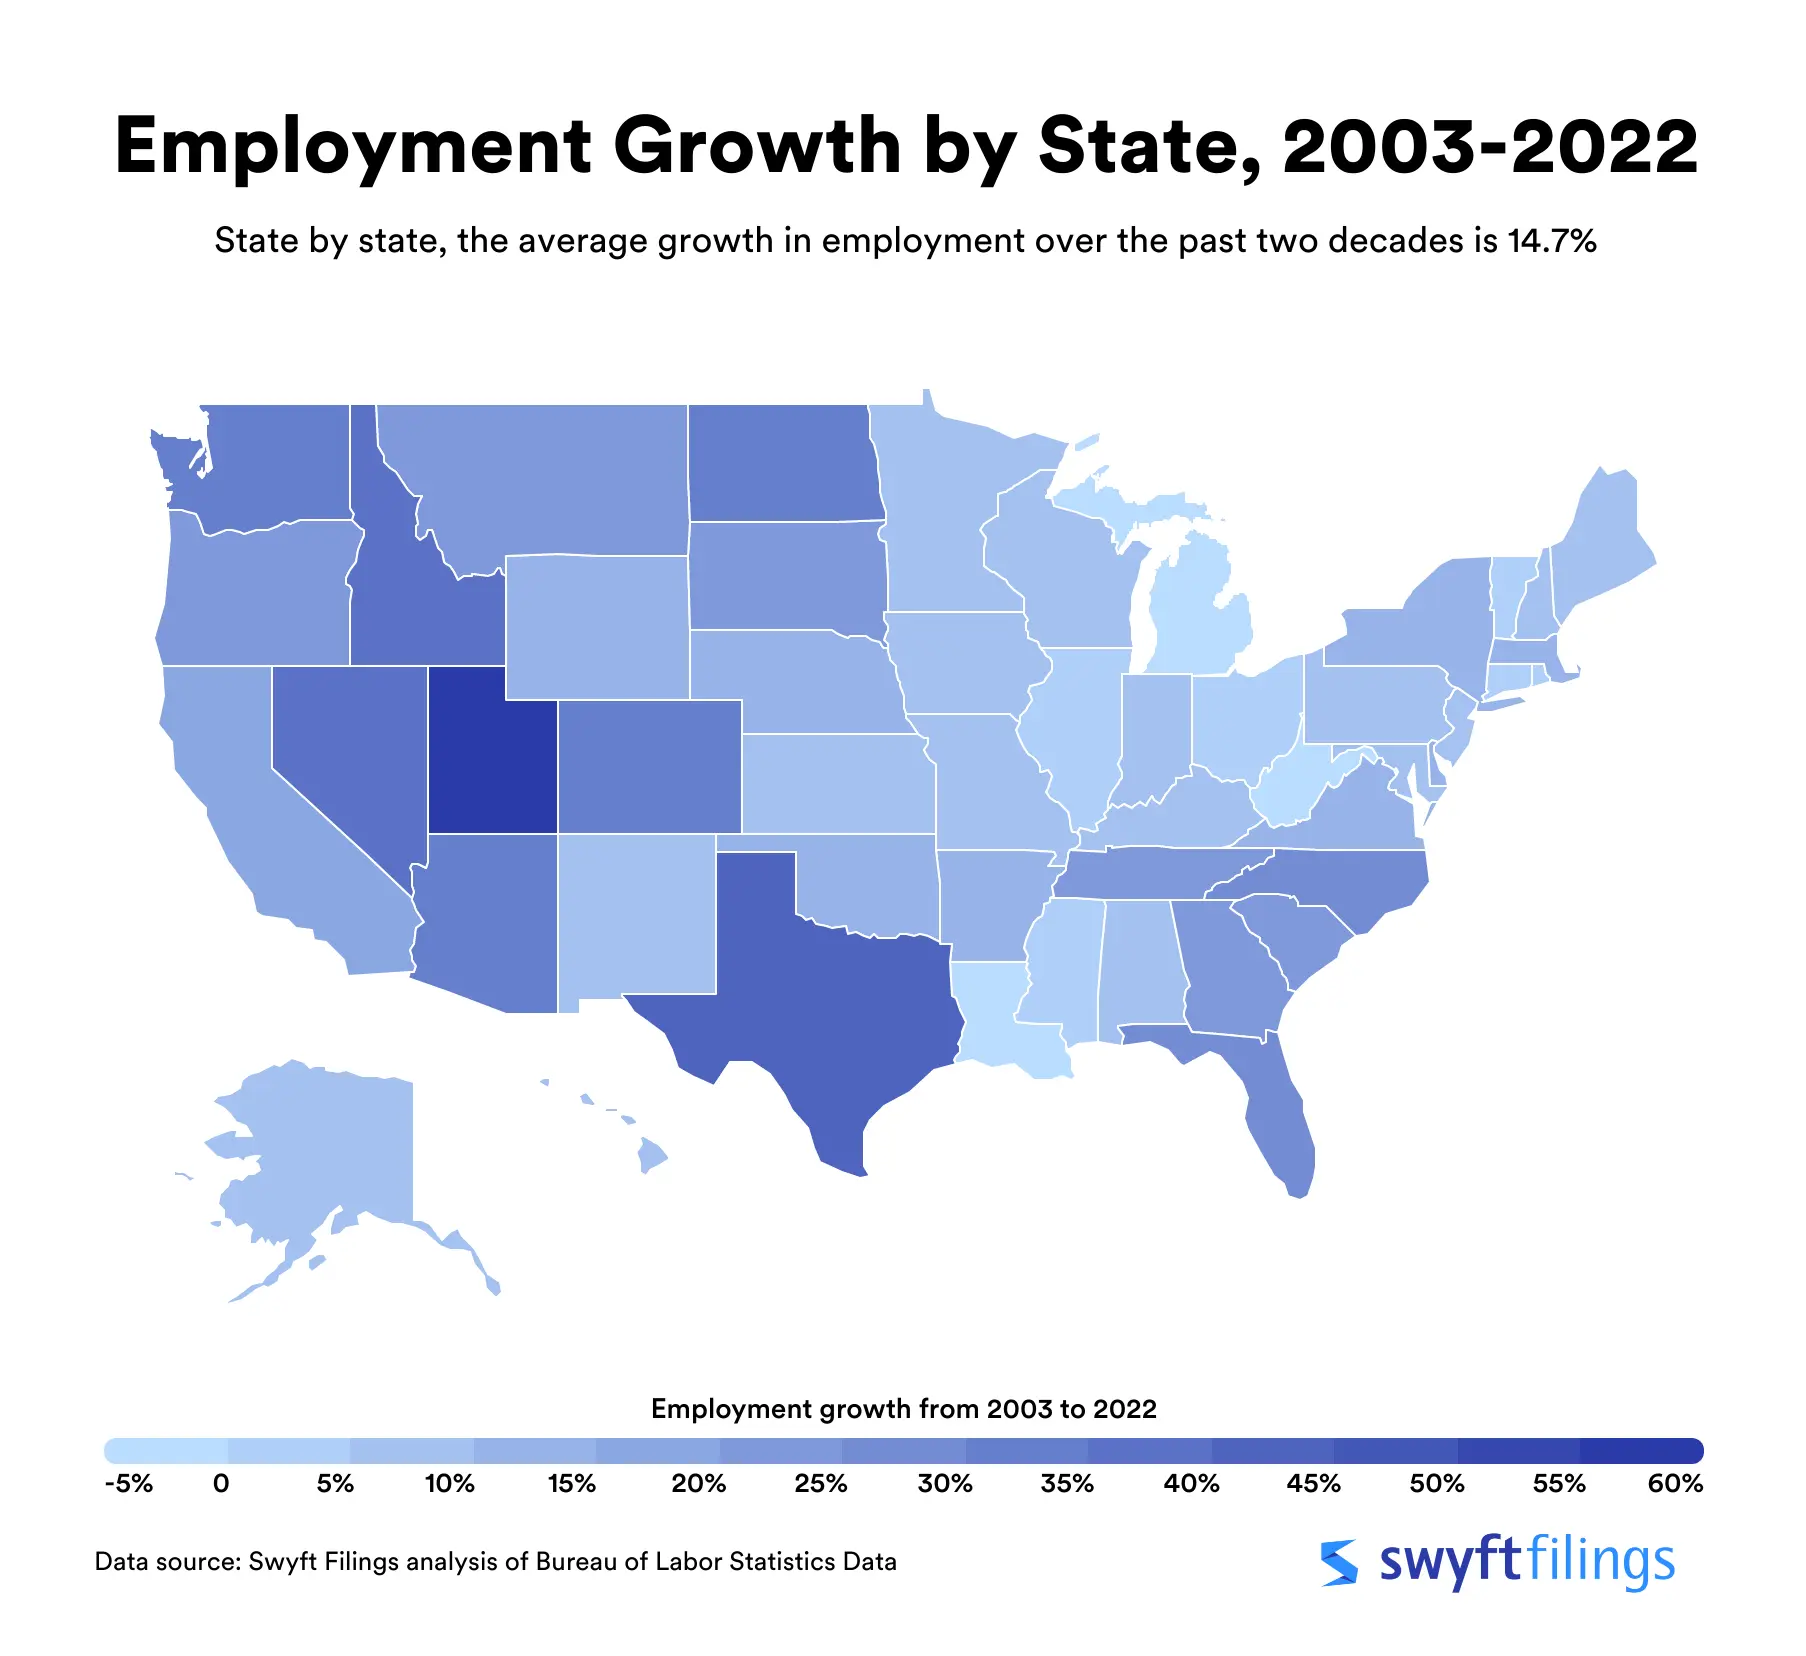 heat map of the united states showing the proportion of employment growth by state from 2003 to 2022